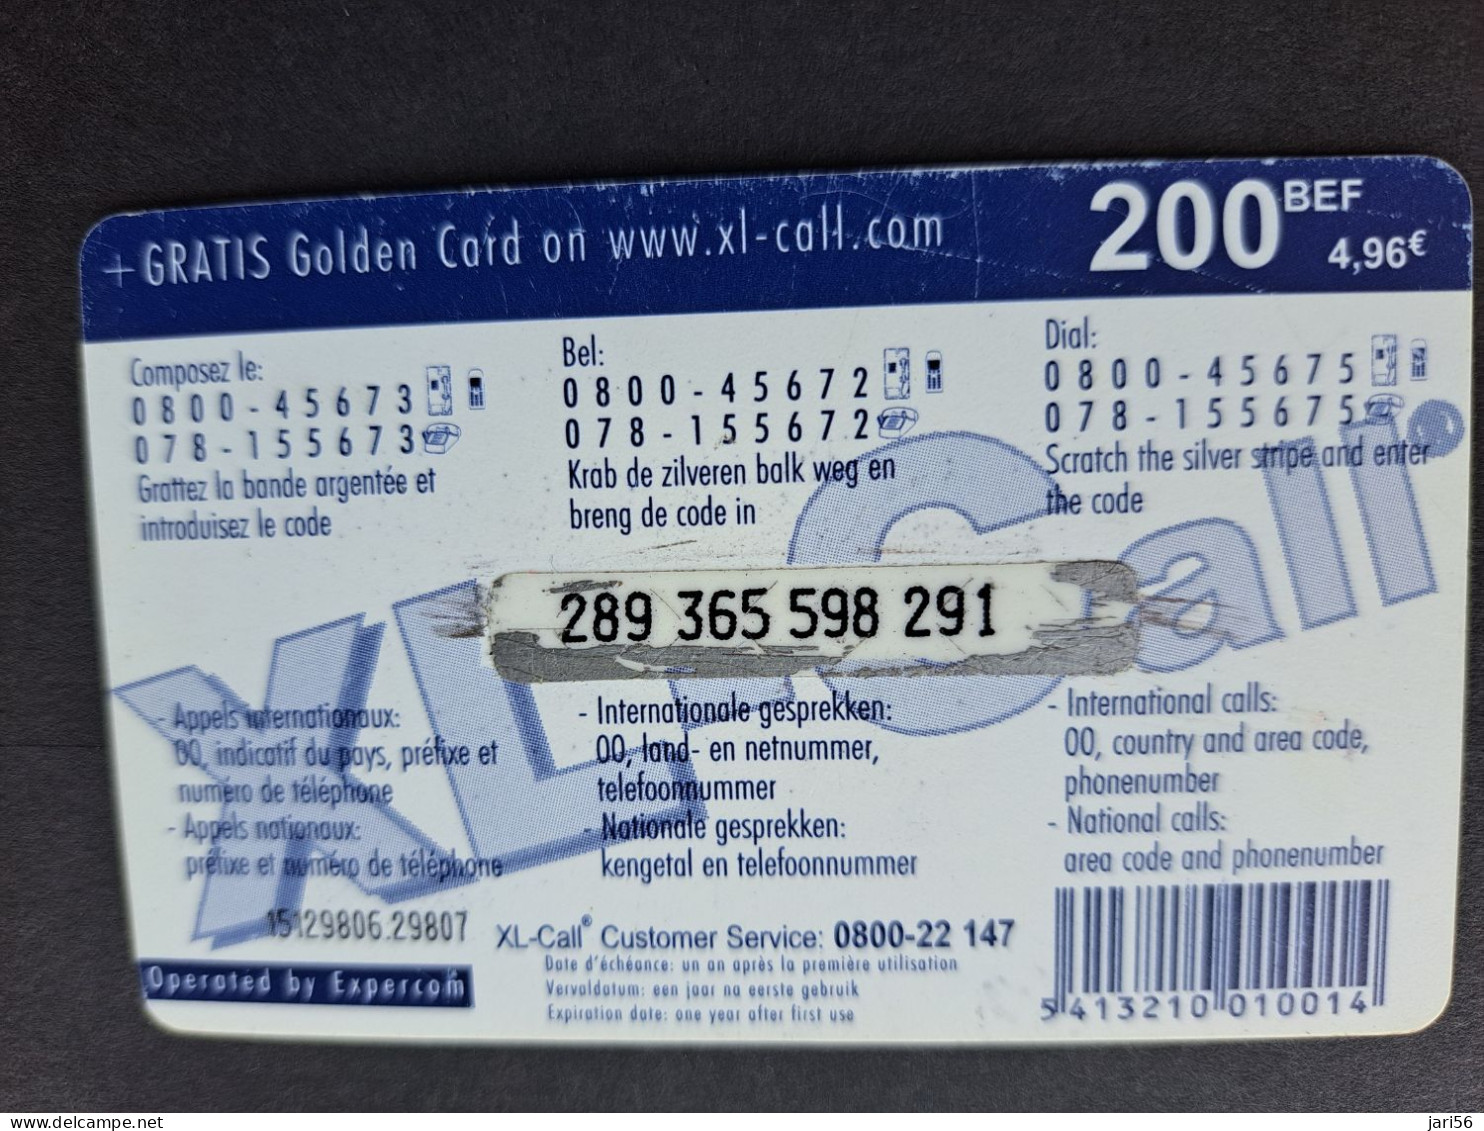 BELGIUM / XL-CALL € 4,96  /  LARGO- WINCH PREPAID /EIFELTOWER/    USED  CARD  ** 16616 ** - Without Chip